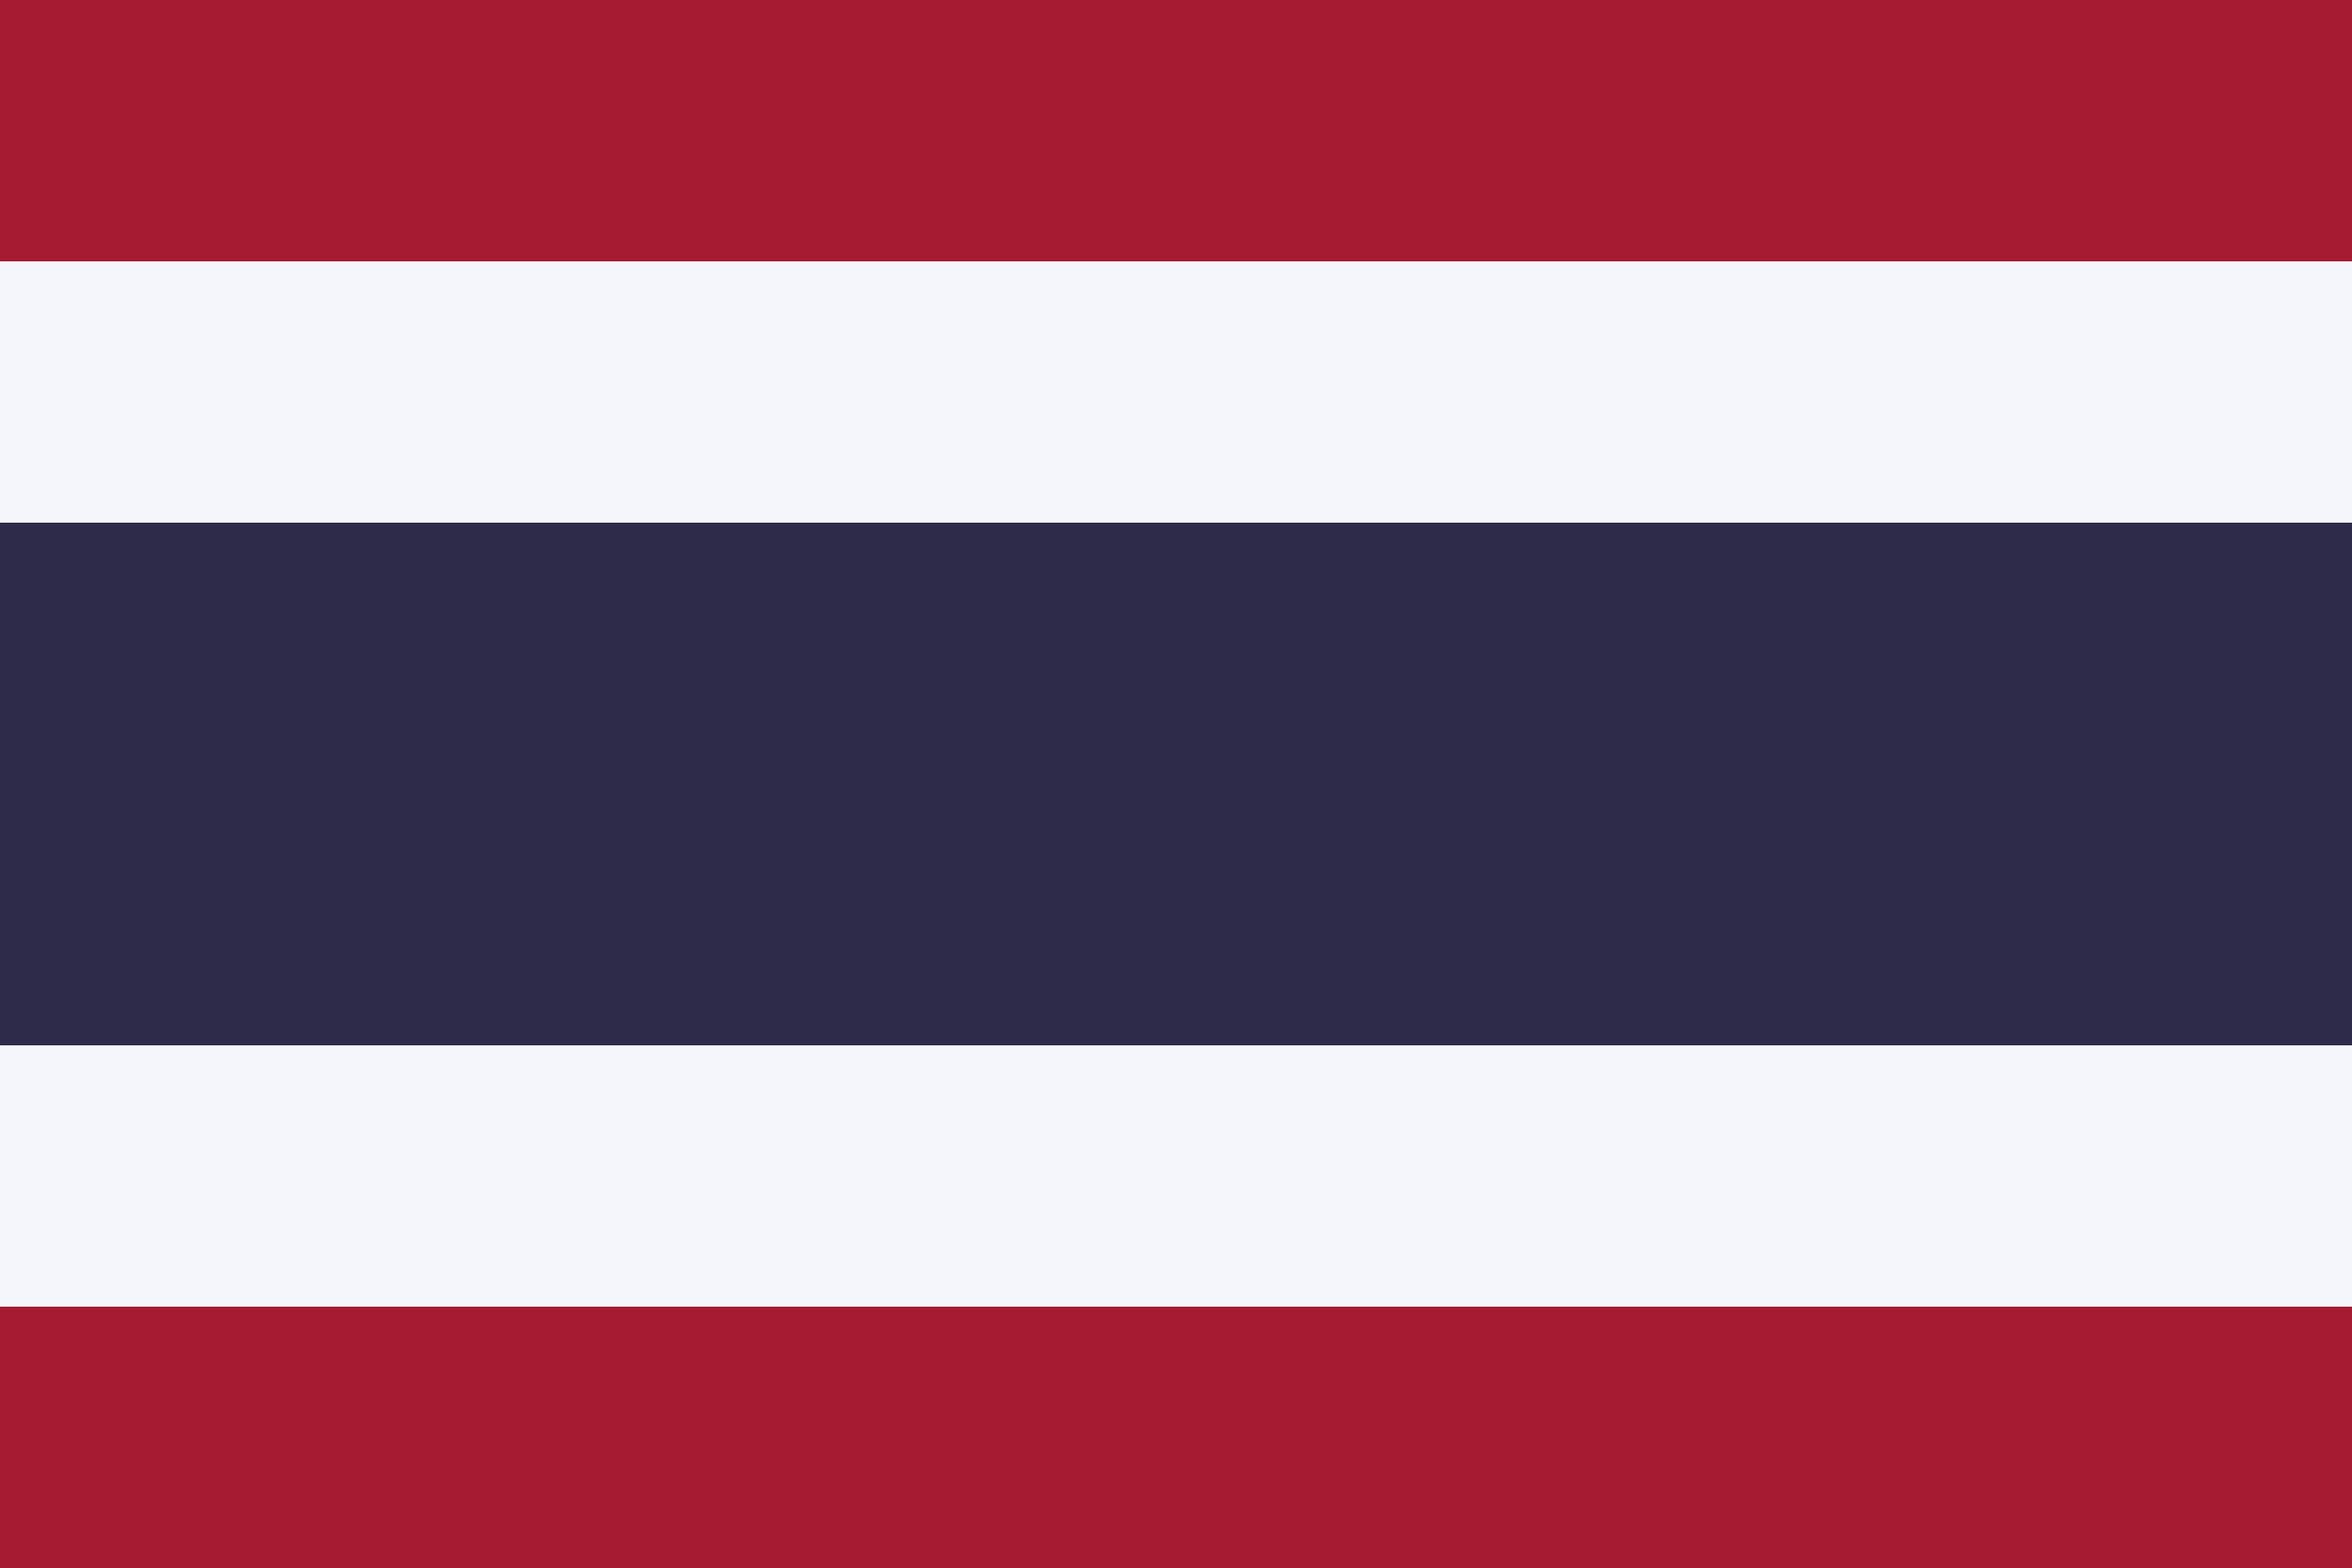 Drone Laws in Thailand